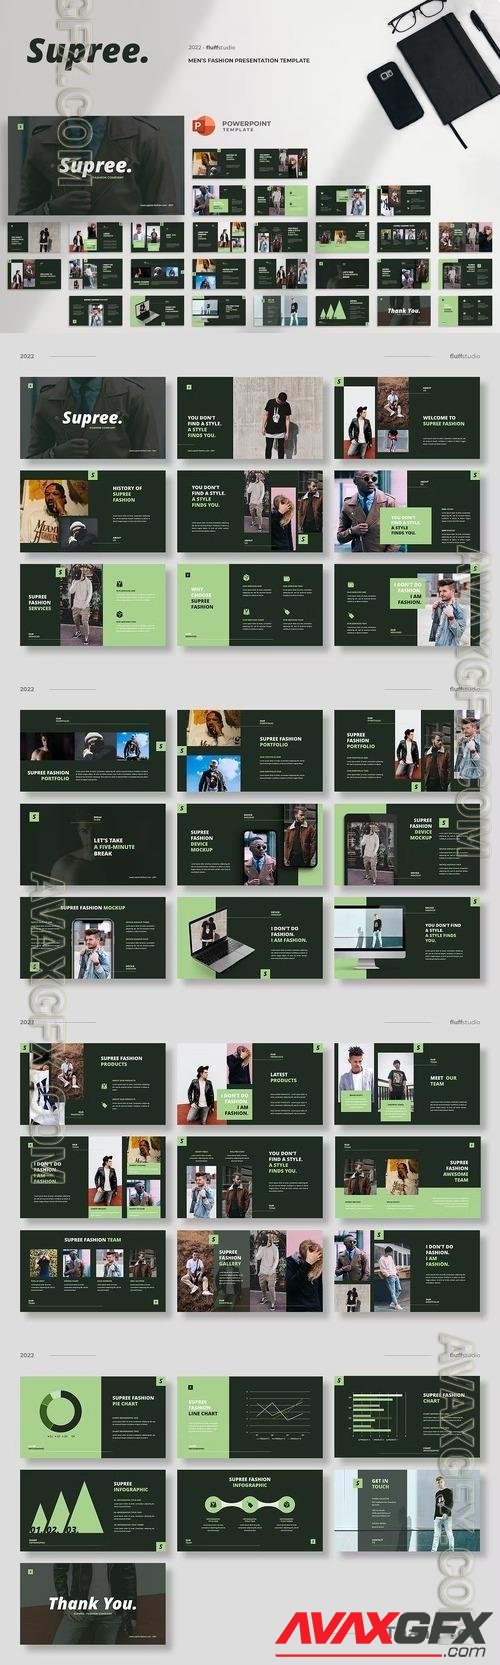 Supree - Men's Fashion Powerpoint Template BYRLHCJ